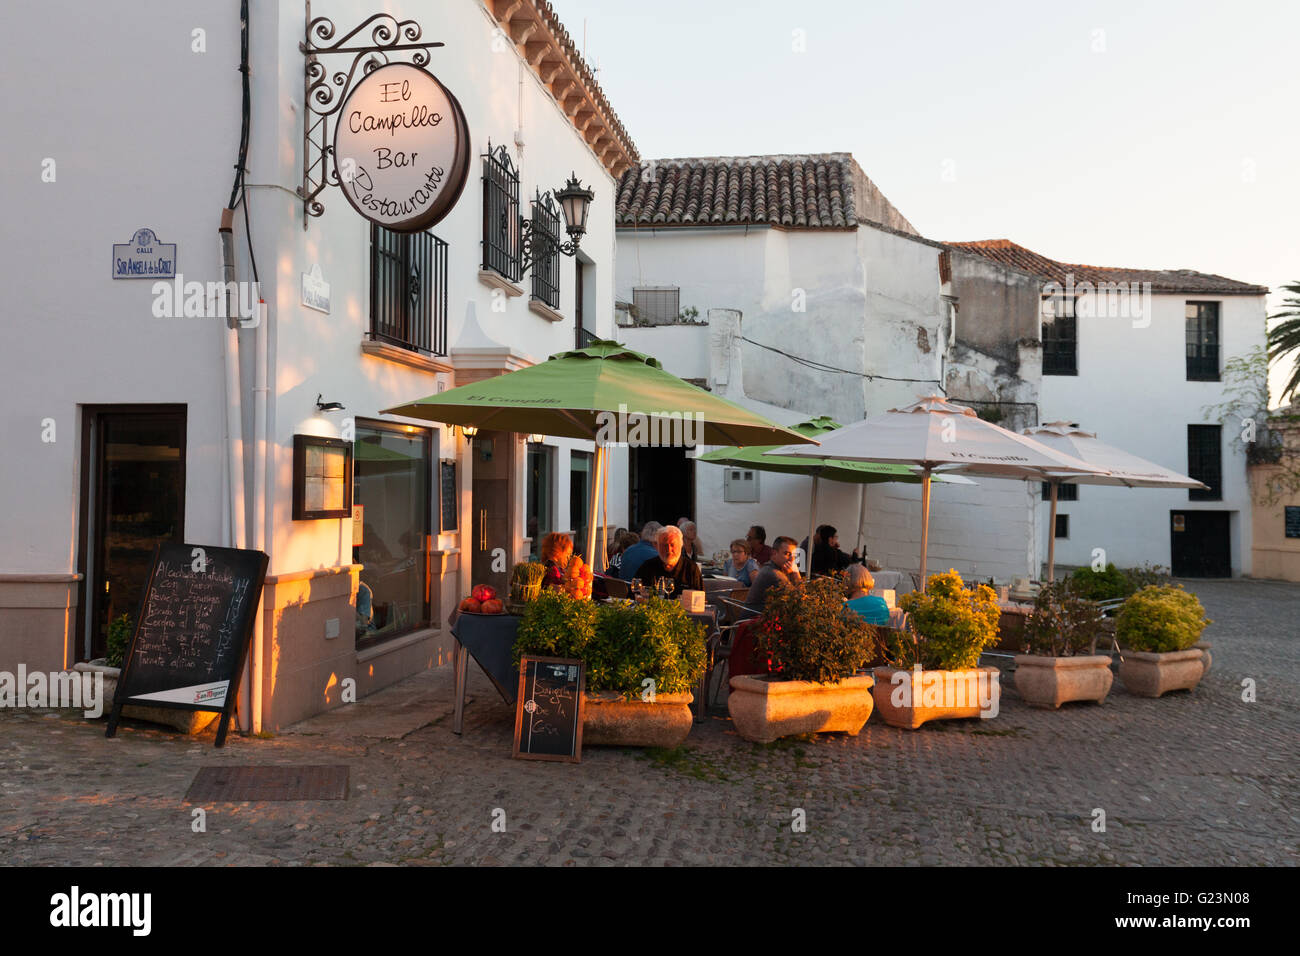 People sitting eating at a restaurant in the evening, Ronda, Andalusia Spain Stock Photo